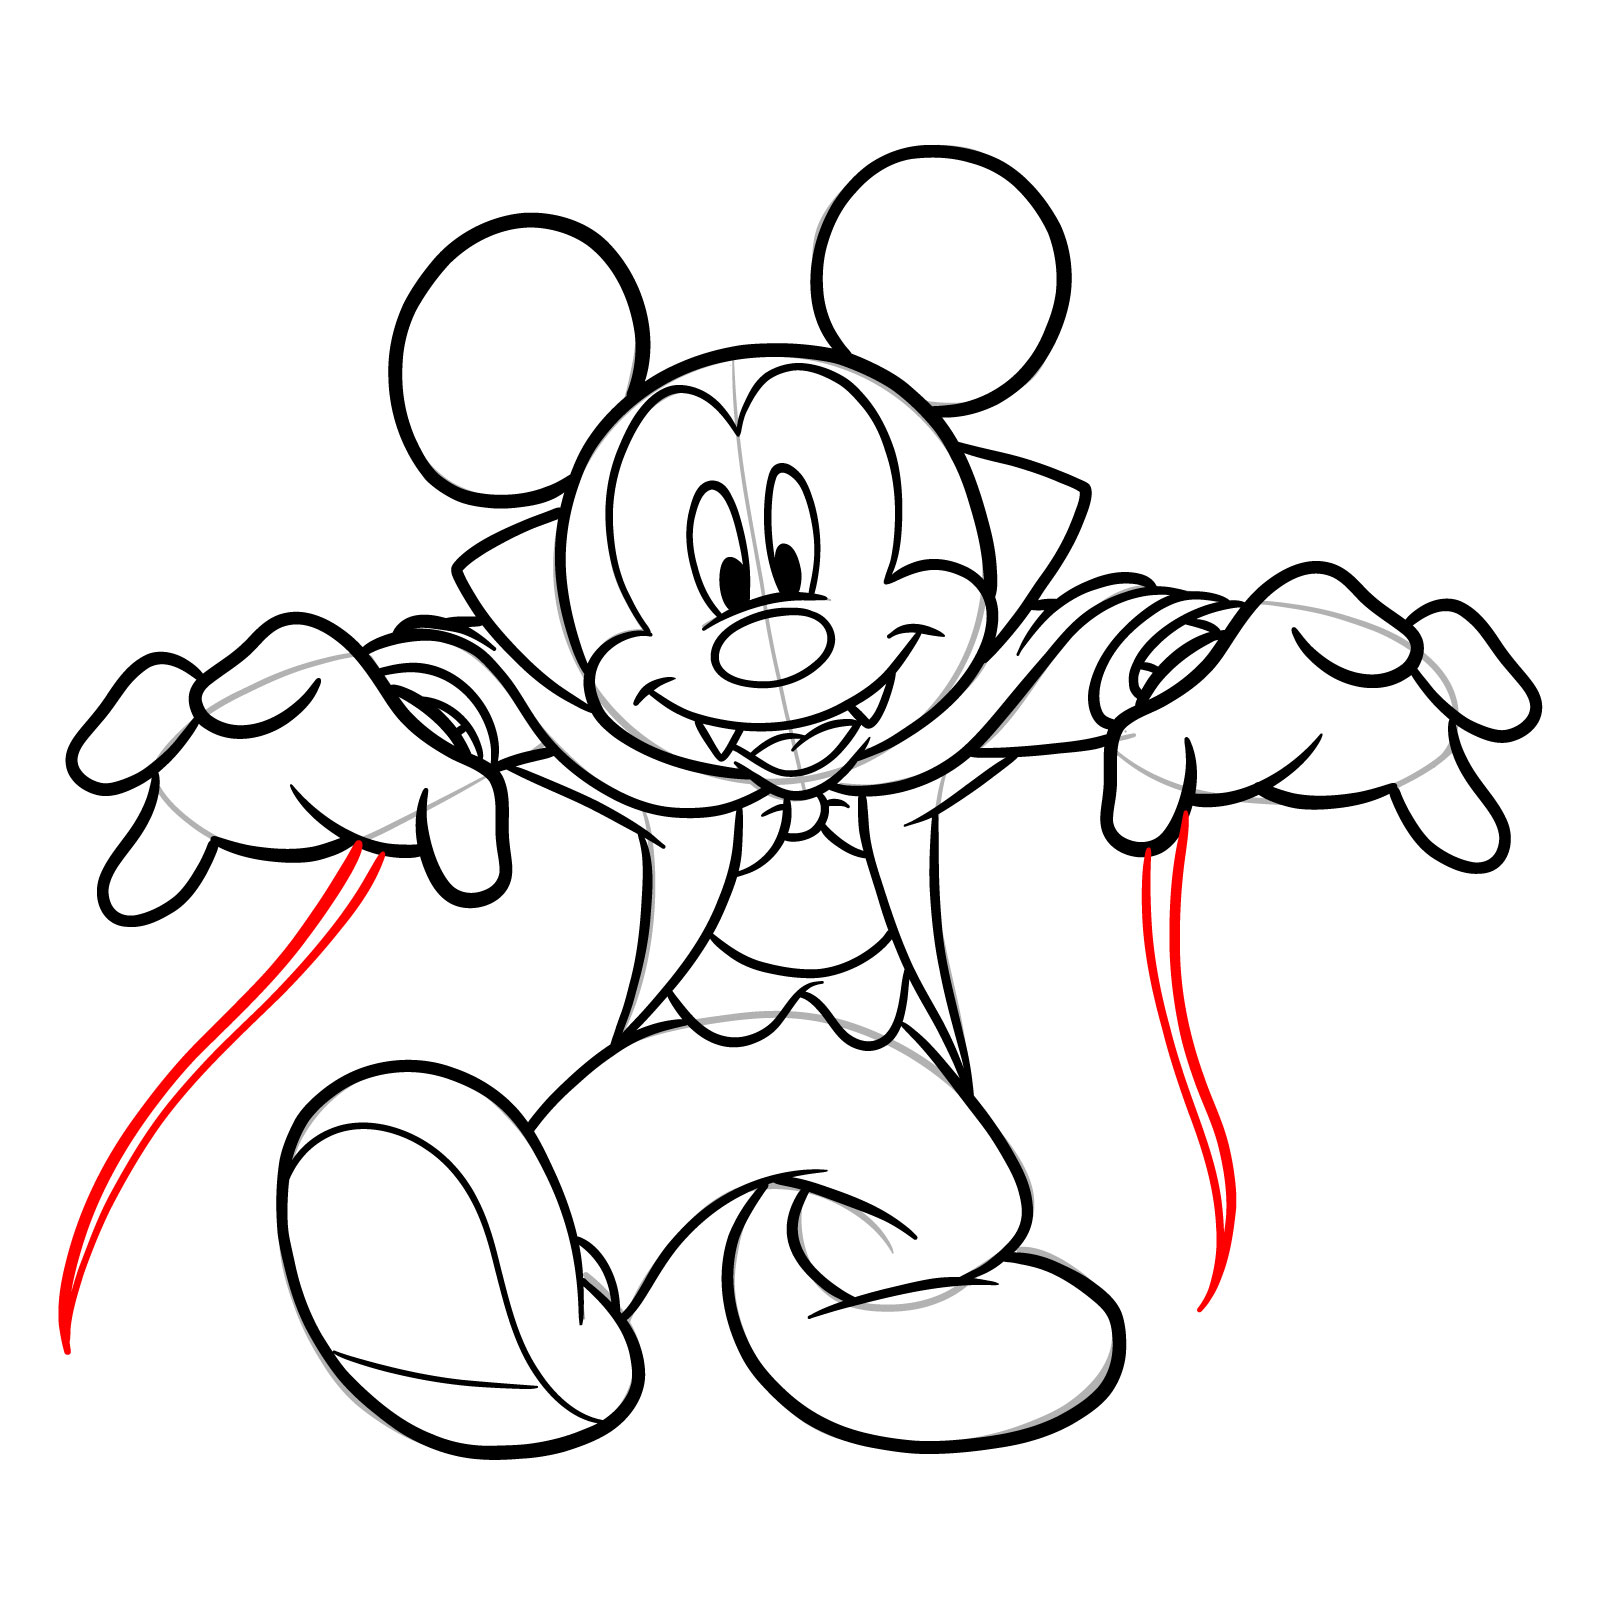 How to draw Dracula Mickey Mouse - step 26